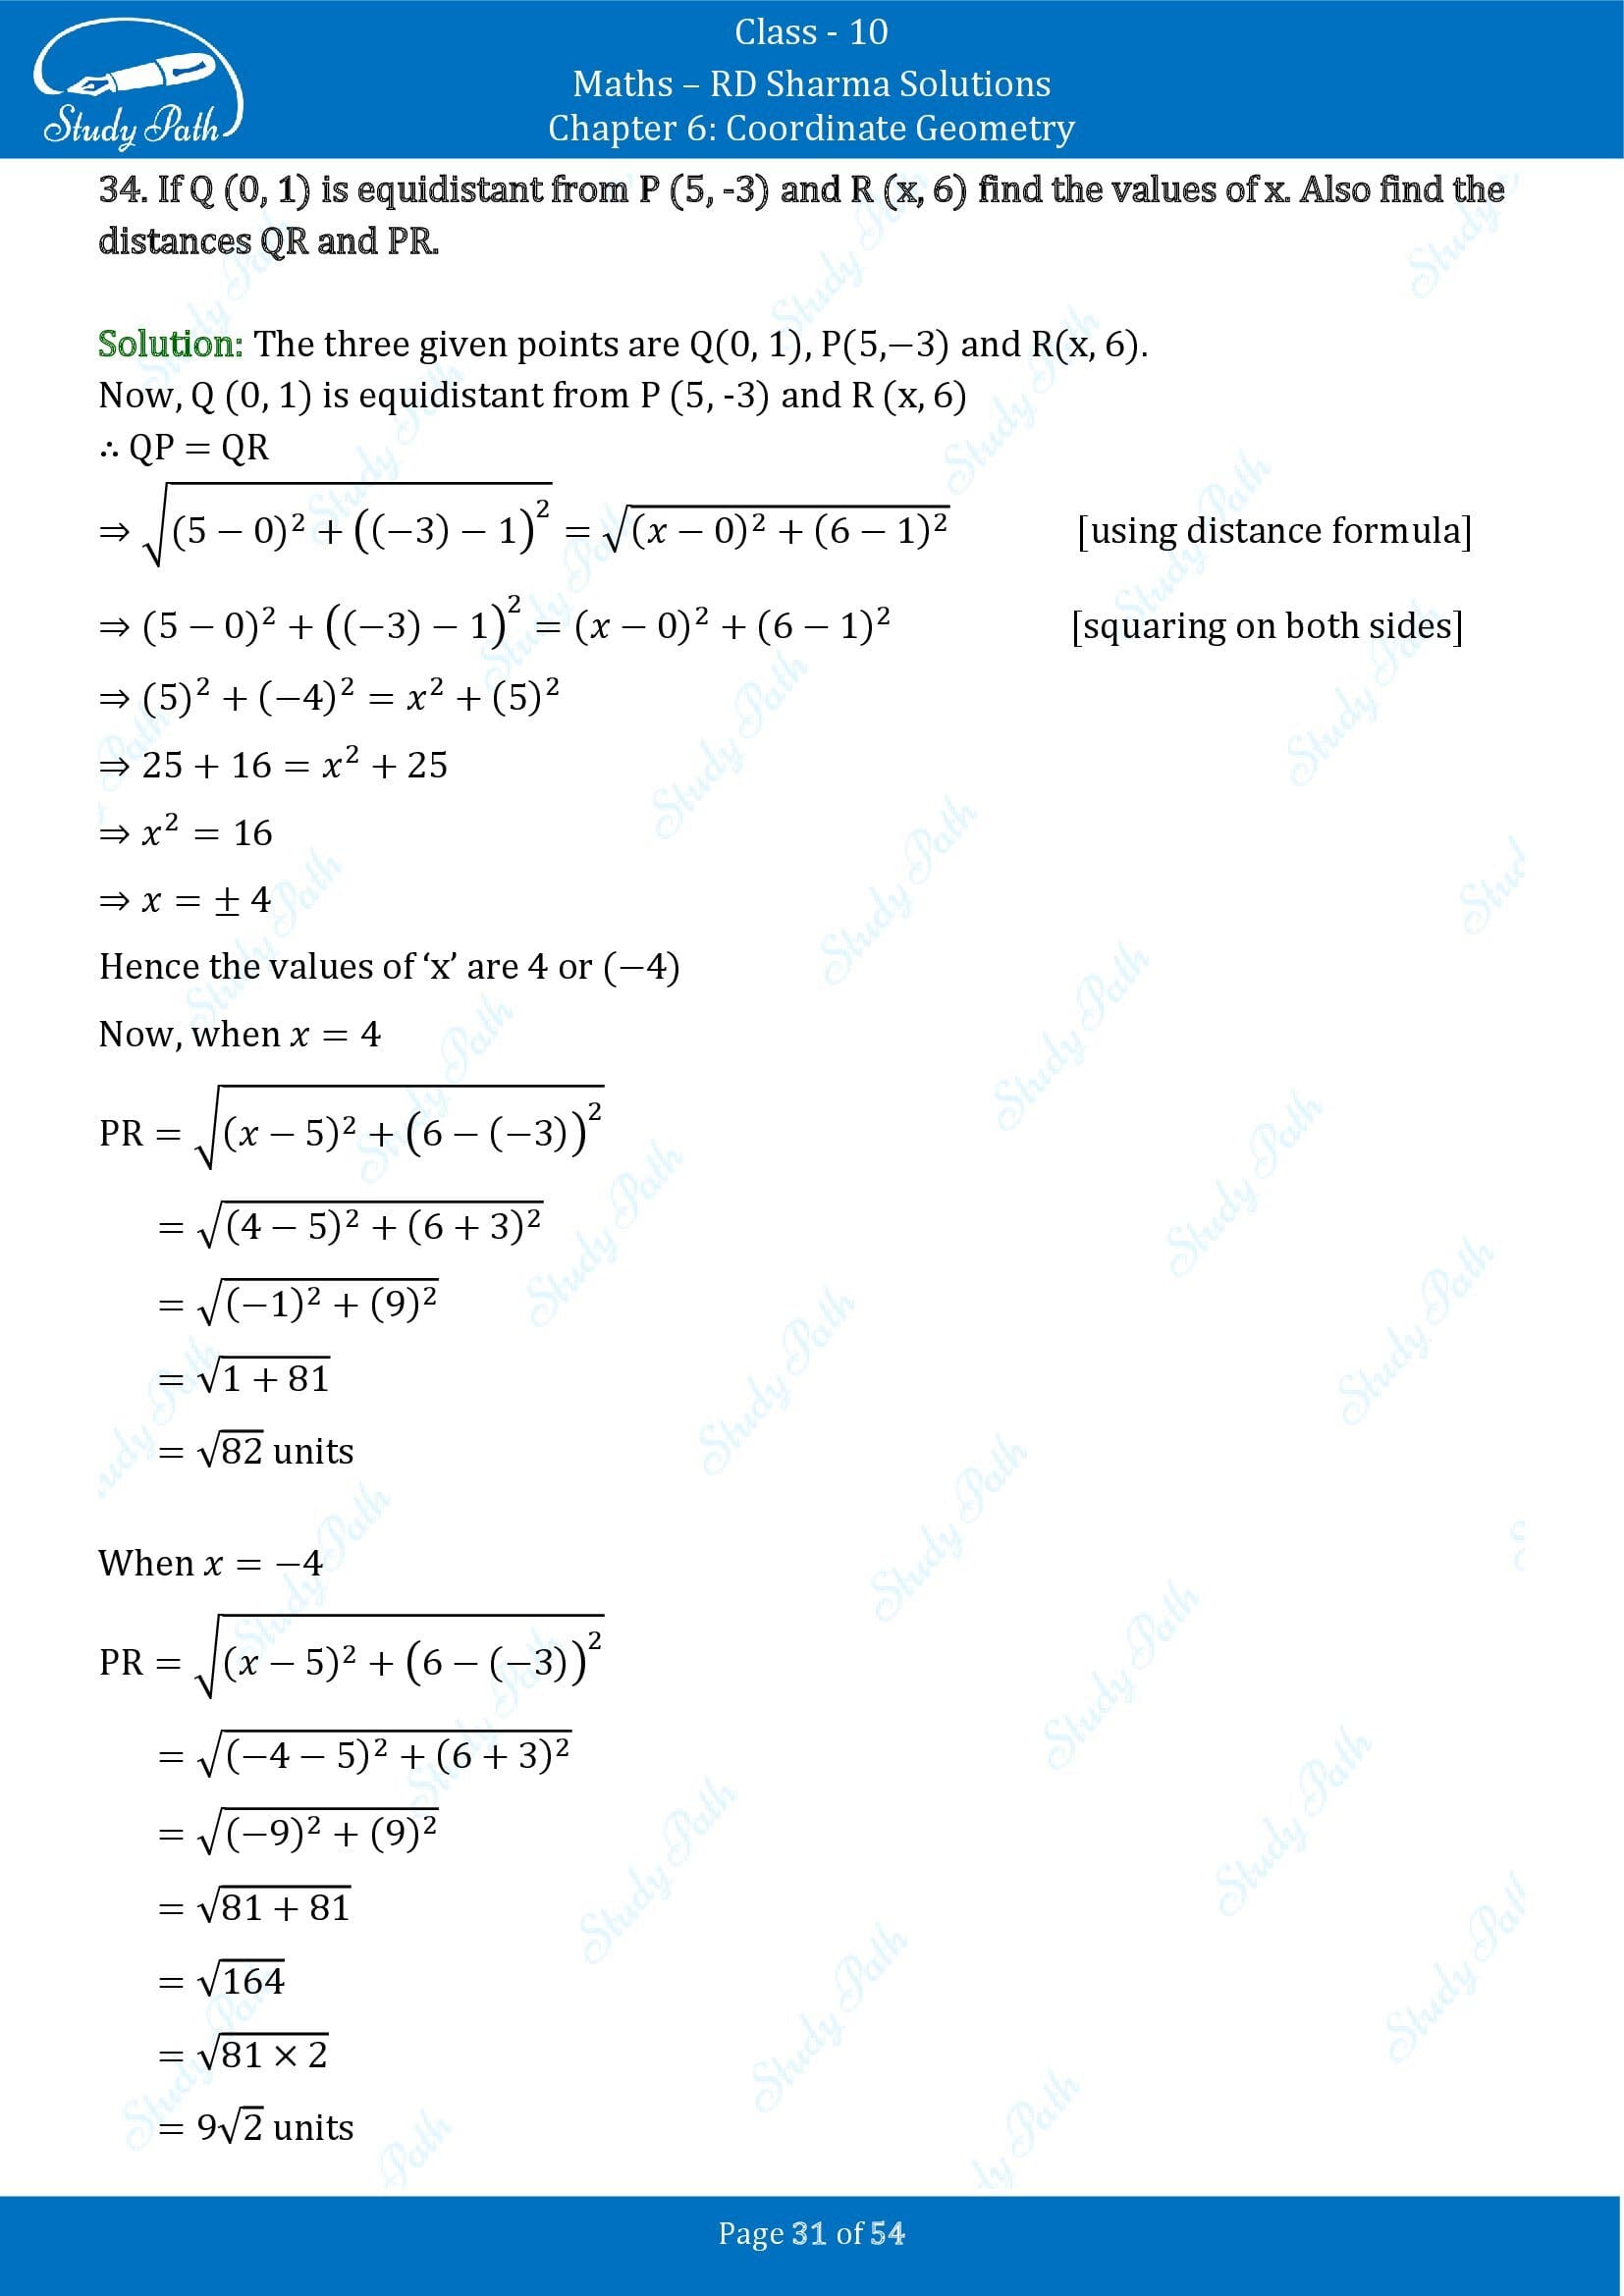 RD Sharma Solutions Class 10 Chapter 6 Coordinate Geometry Exercise 6.2 0031